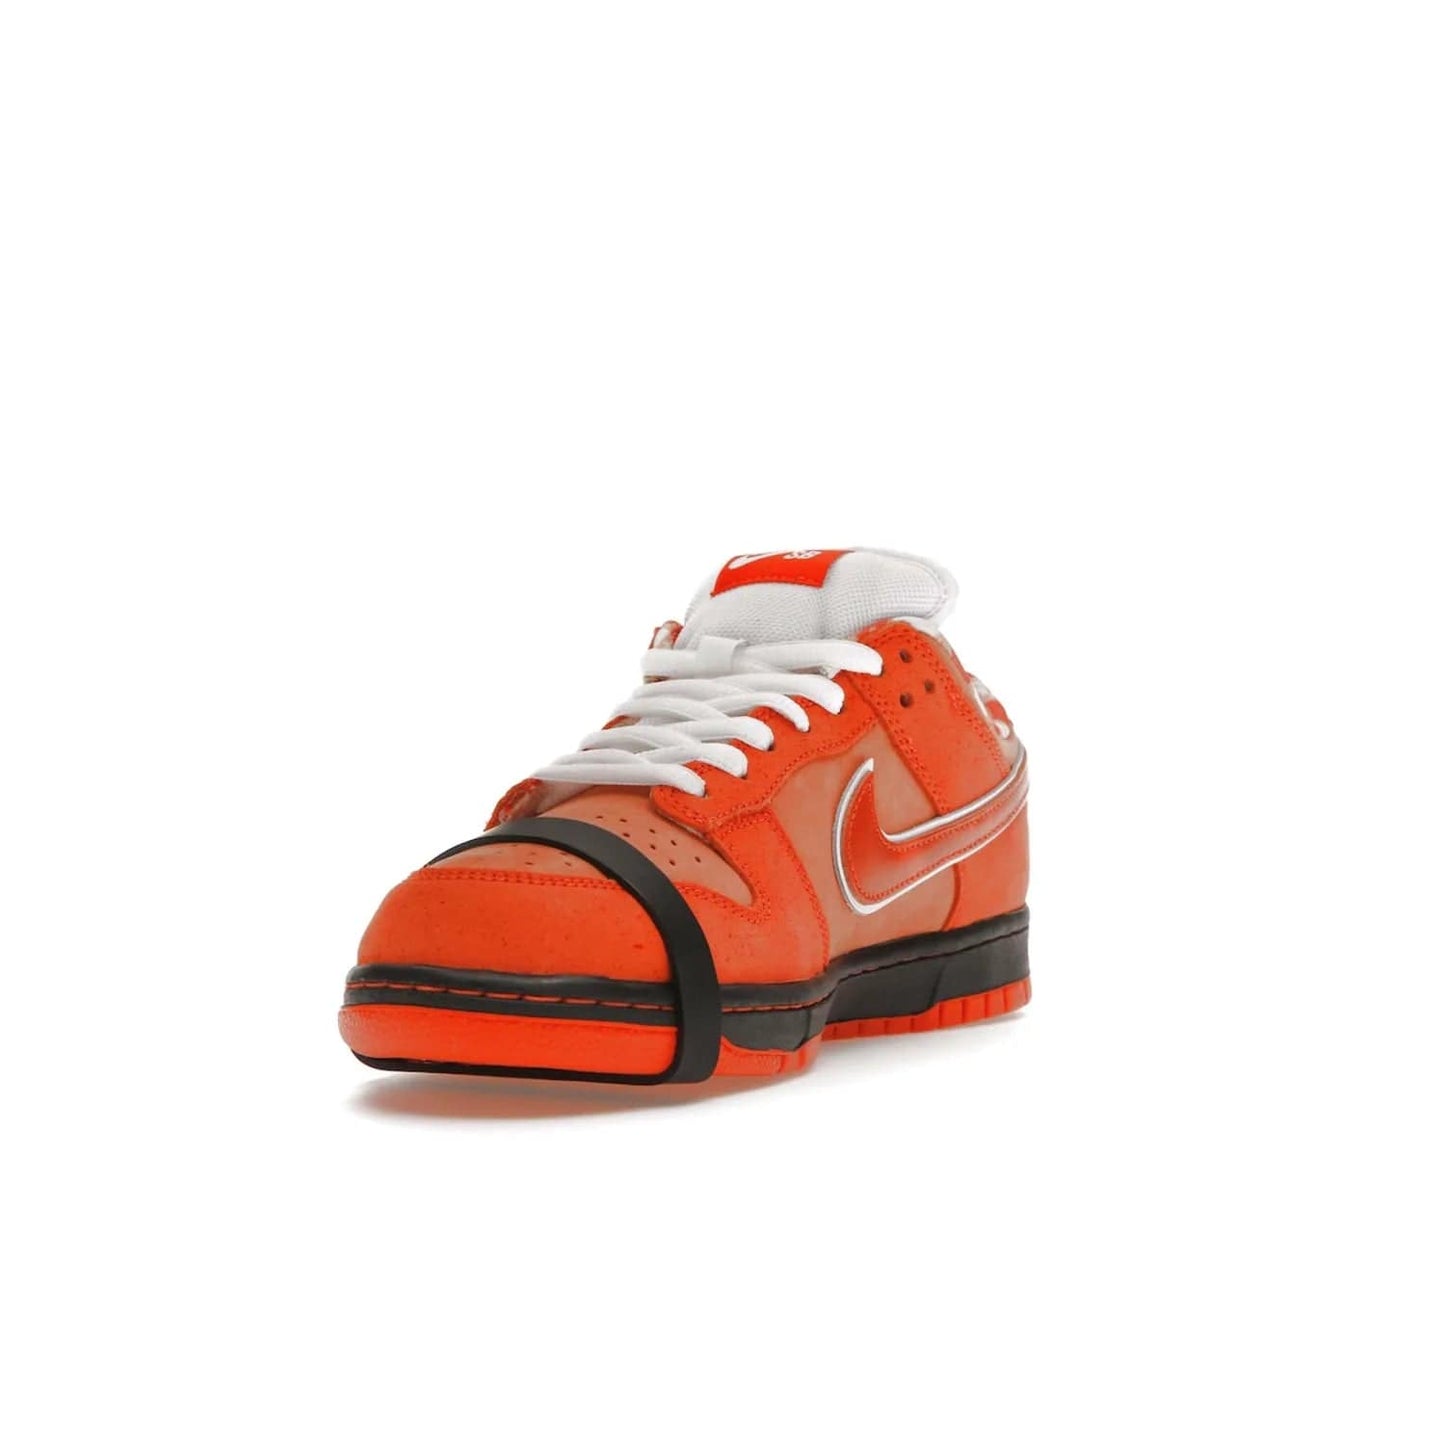 Nike SB Dunk Low Concepts Orange Lobster - Image 13 - Only at www.BallersClubKickz.com - Limited Nike SB Dunk Low Concepts Orange Lobster features premium nubuck upper with vibrant oranges for eye-catching colorblocked design. Signature Nike SB tag and bib-inspired interior for added texture. Outsole and cupsole provide extra reinforcement. Get it 12/20/2022.